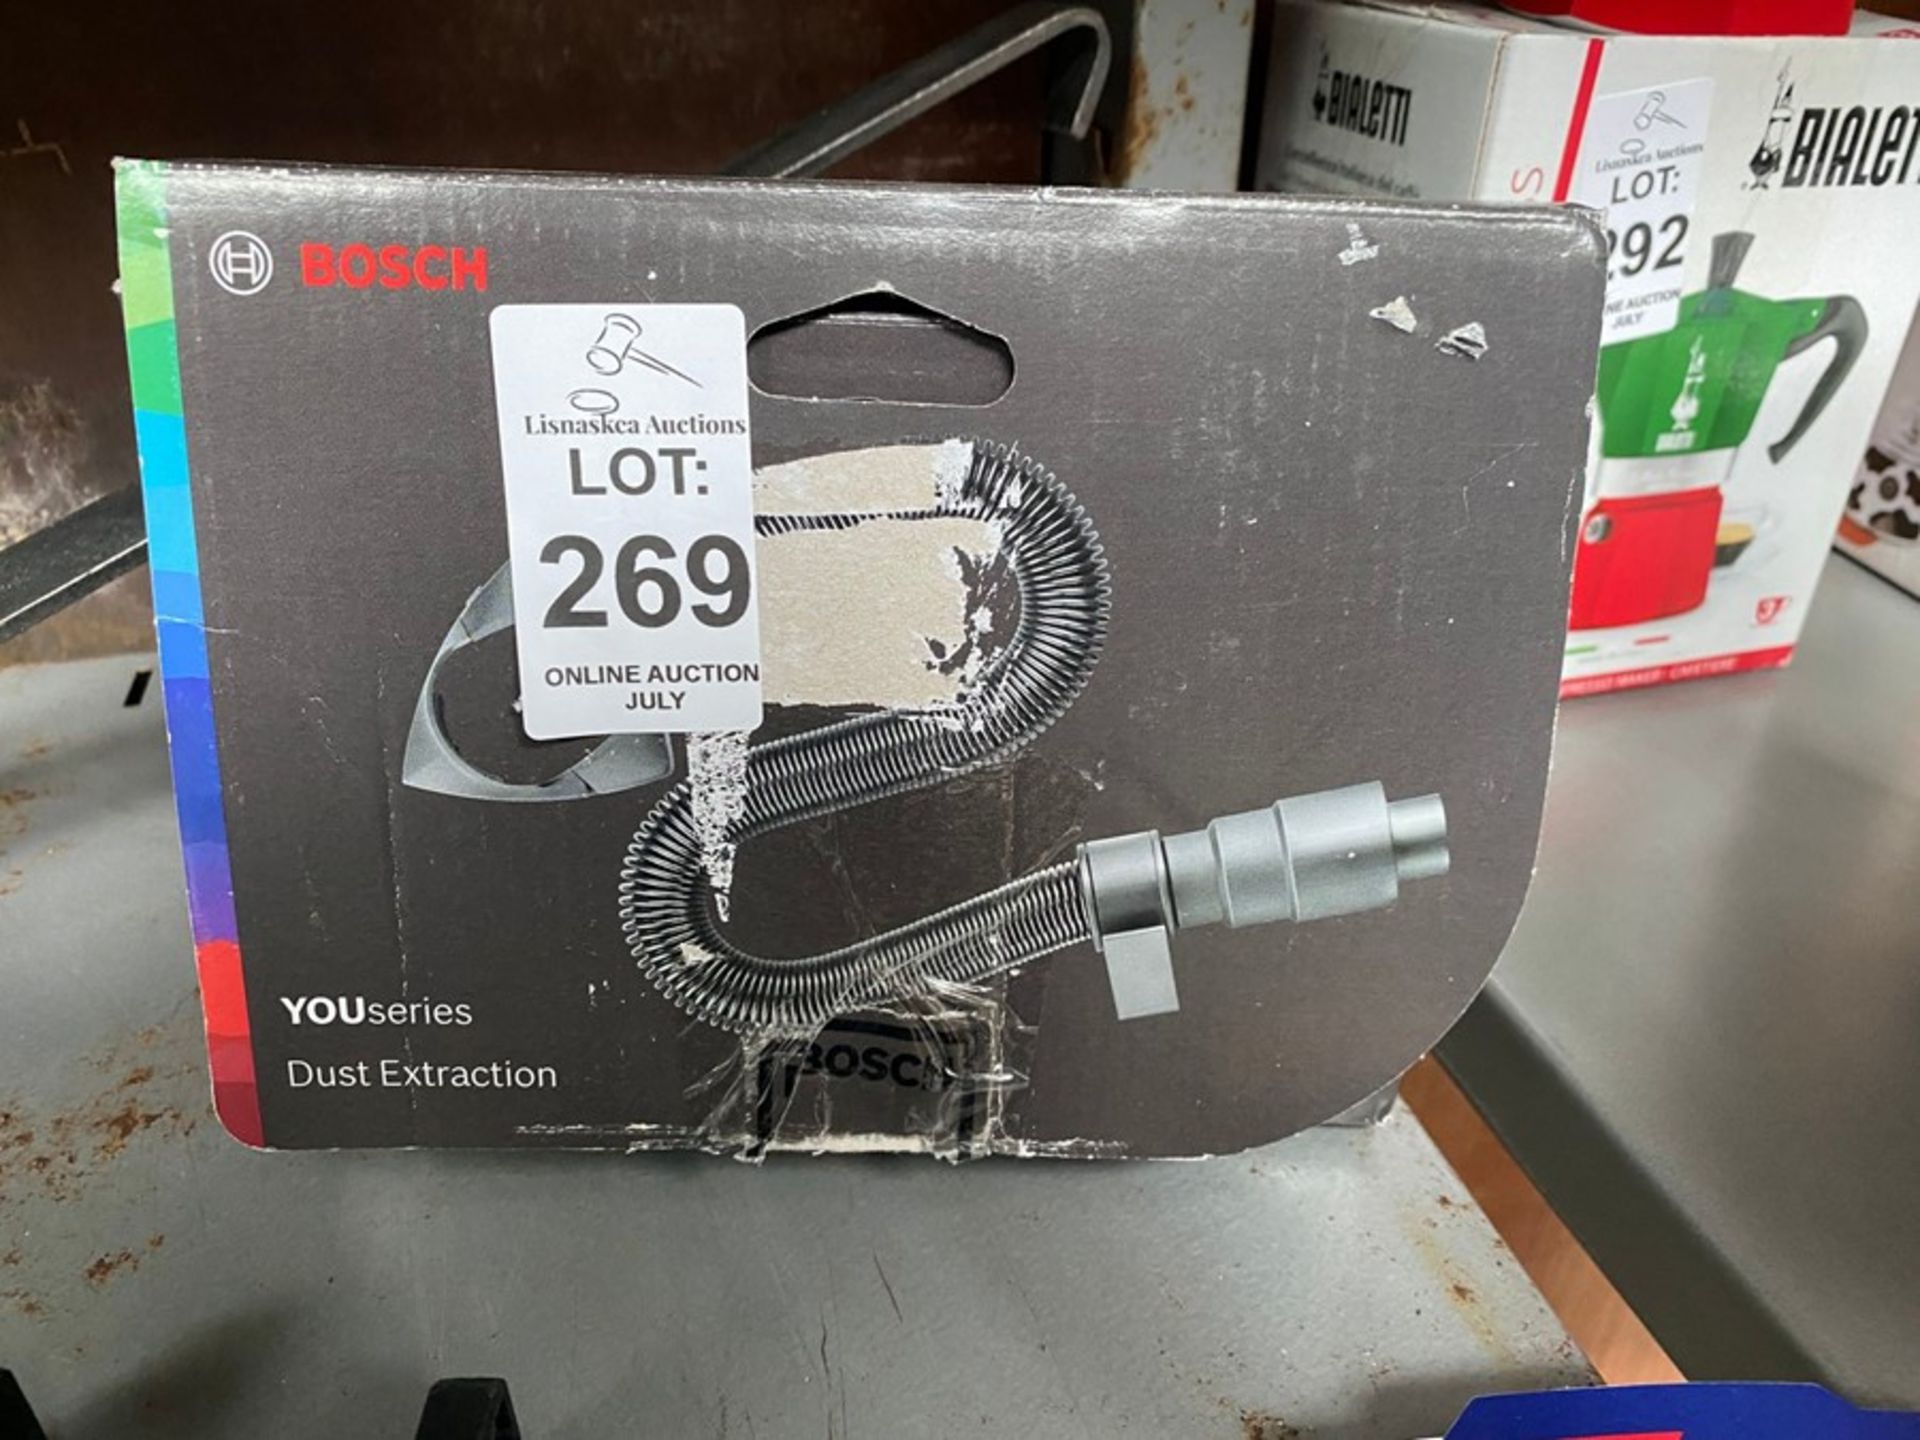 BOSCH YOU SERIES DUST EXTRACTION SANDER NOZZLE